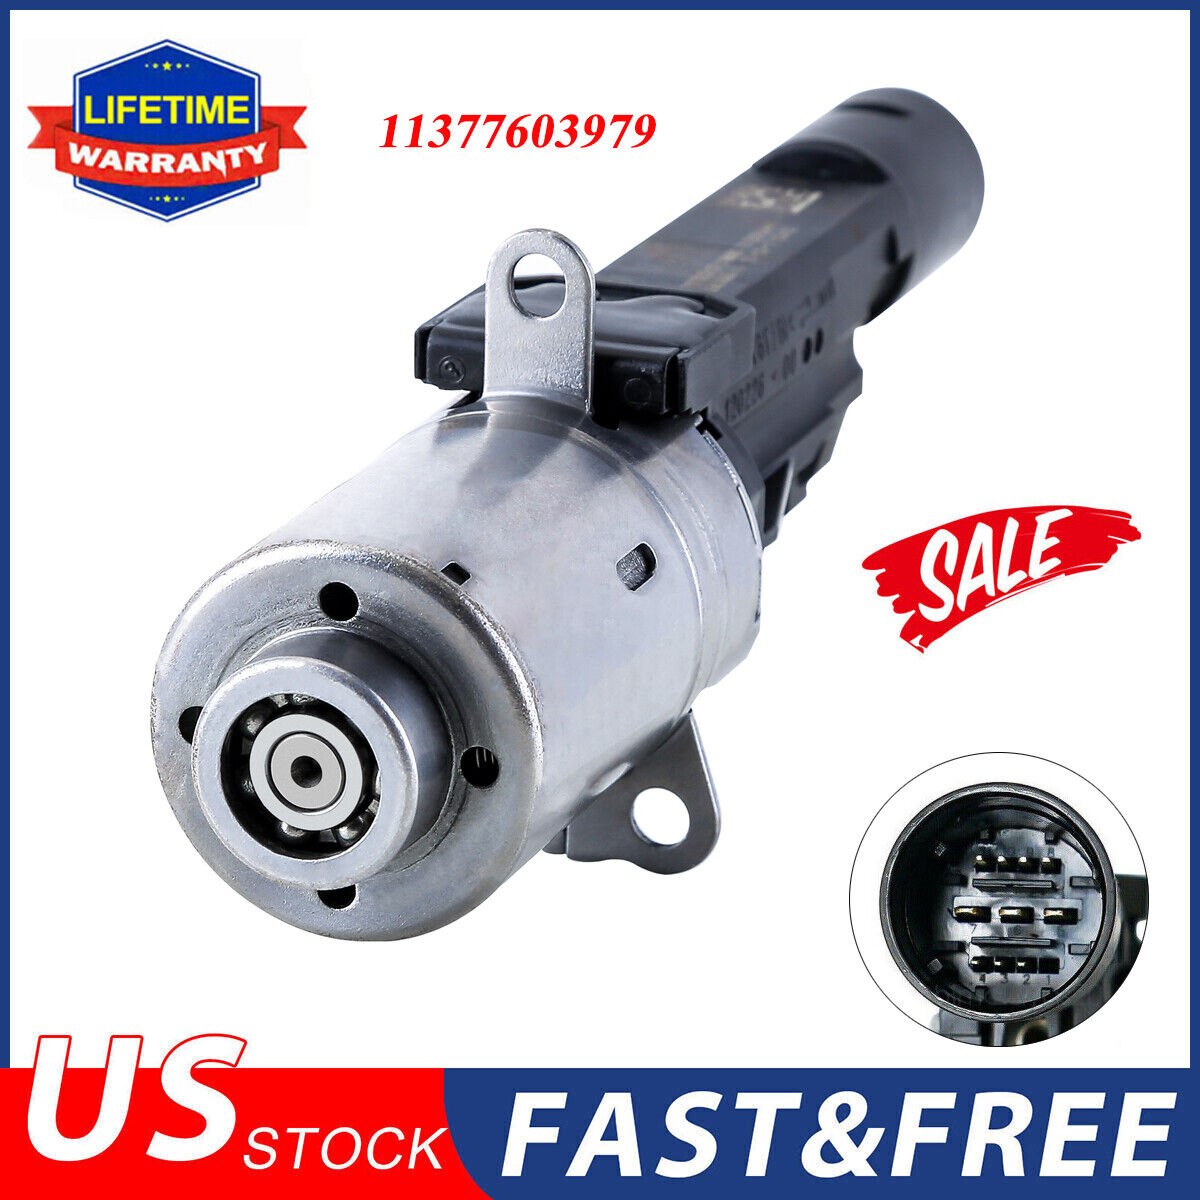 11377603979 FOR BMW N20 N55 S55 ENGINE VALVETRONIC ECCENTRIC SHAFT ACTUATOR NEW